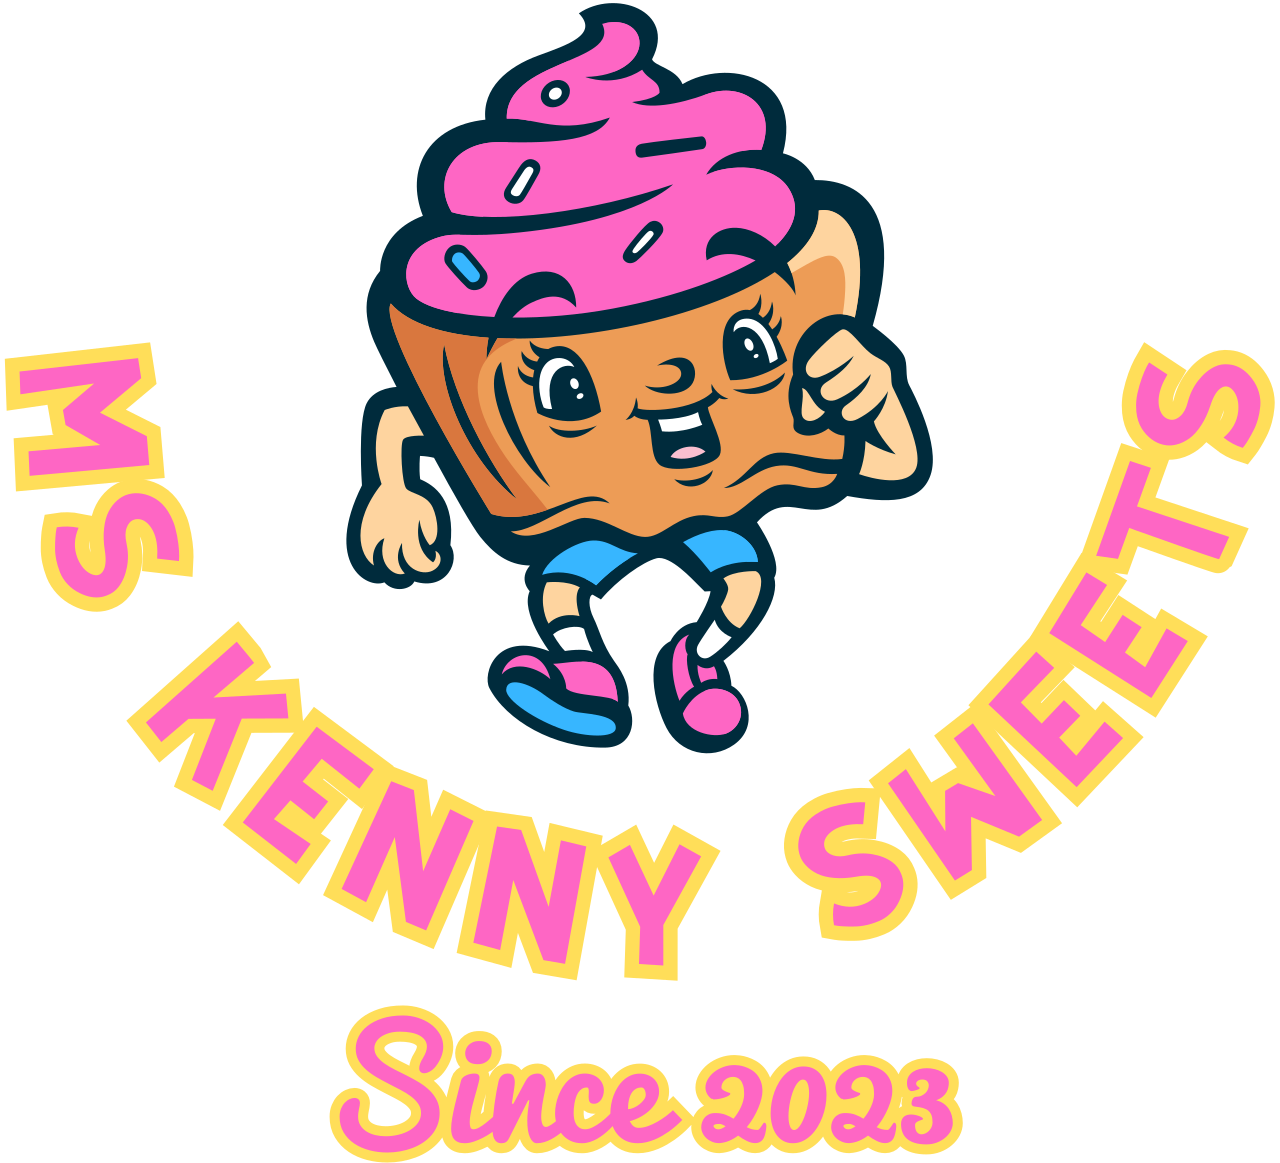 ms kenny sweets's web page